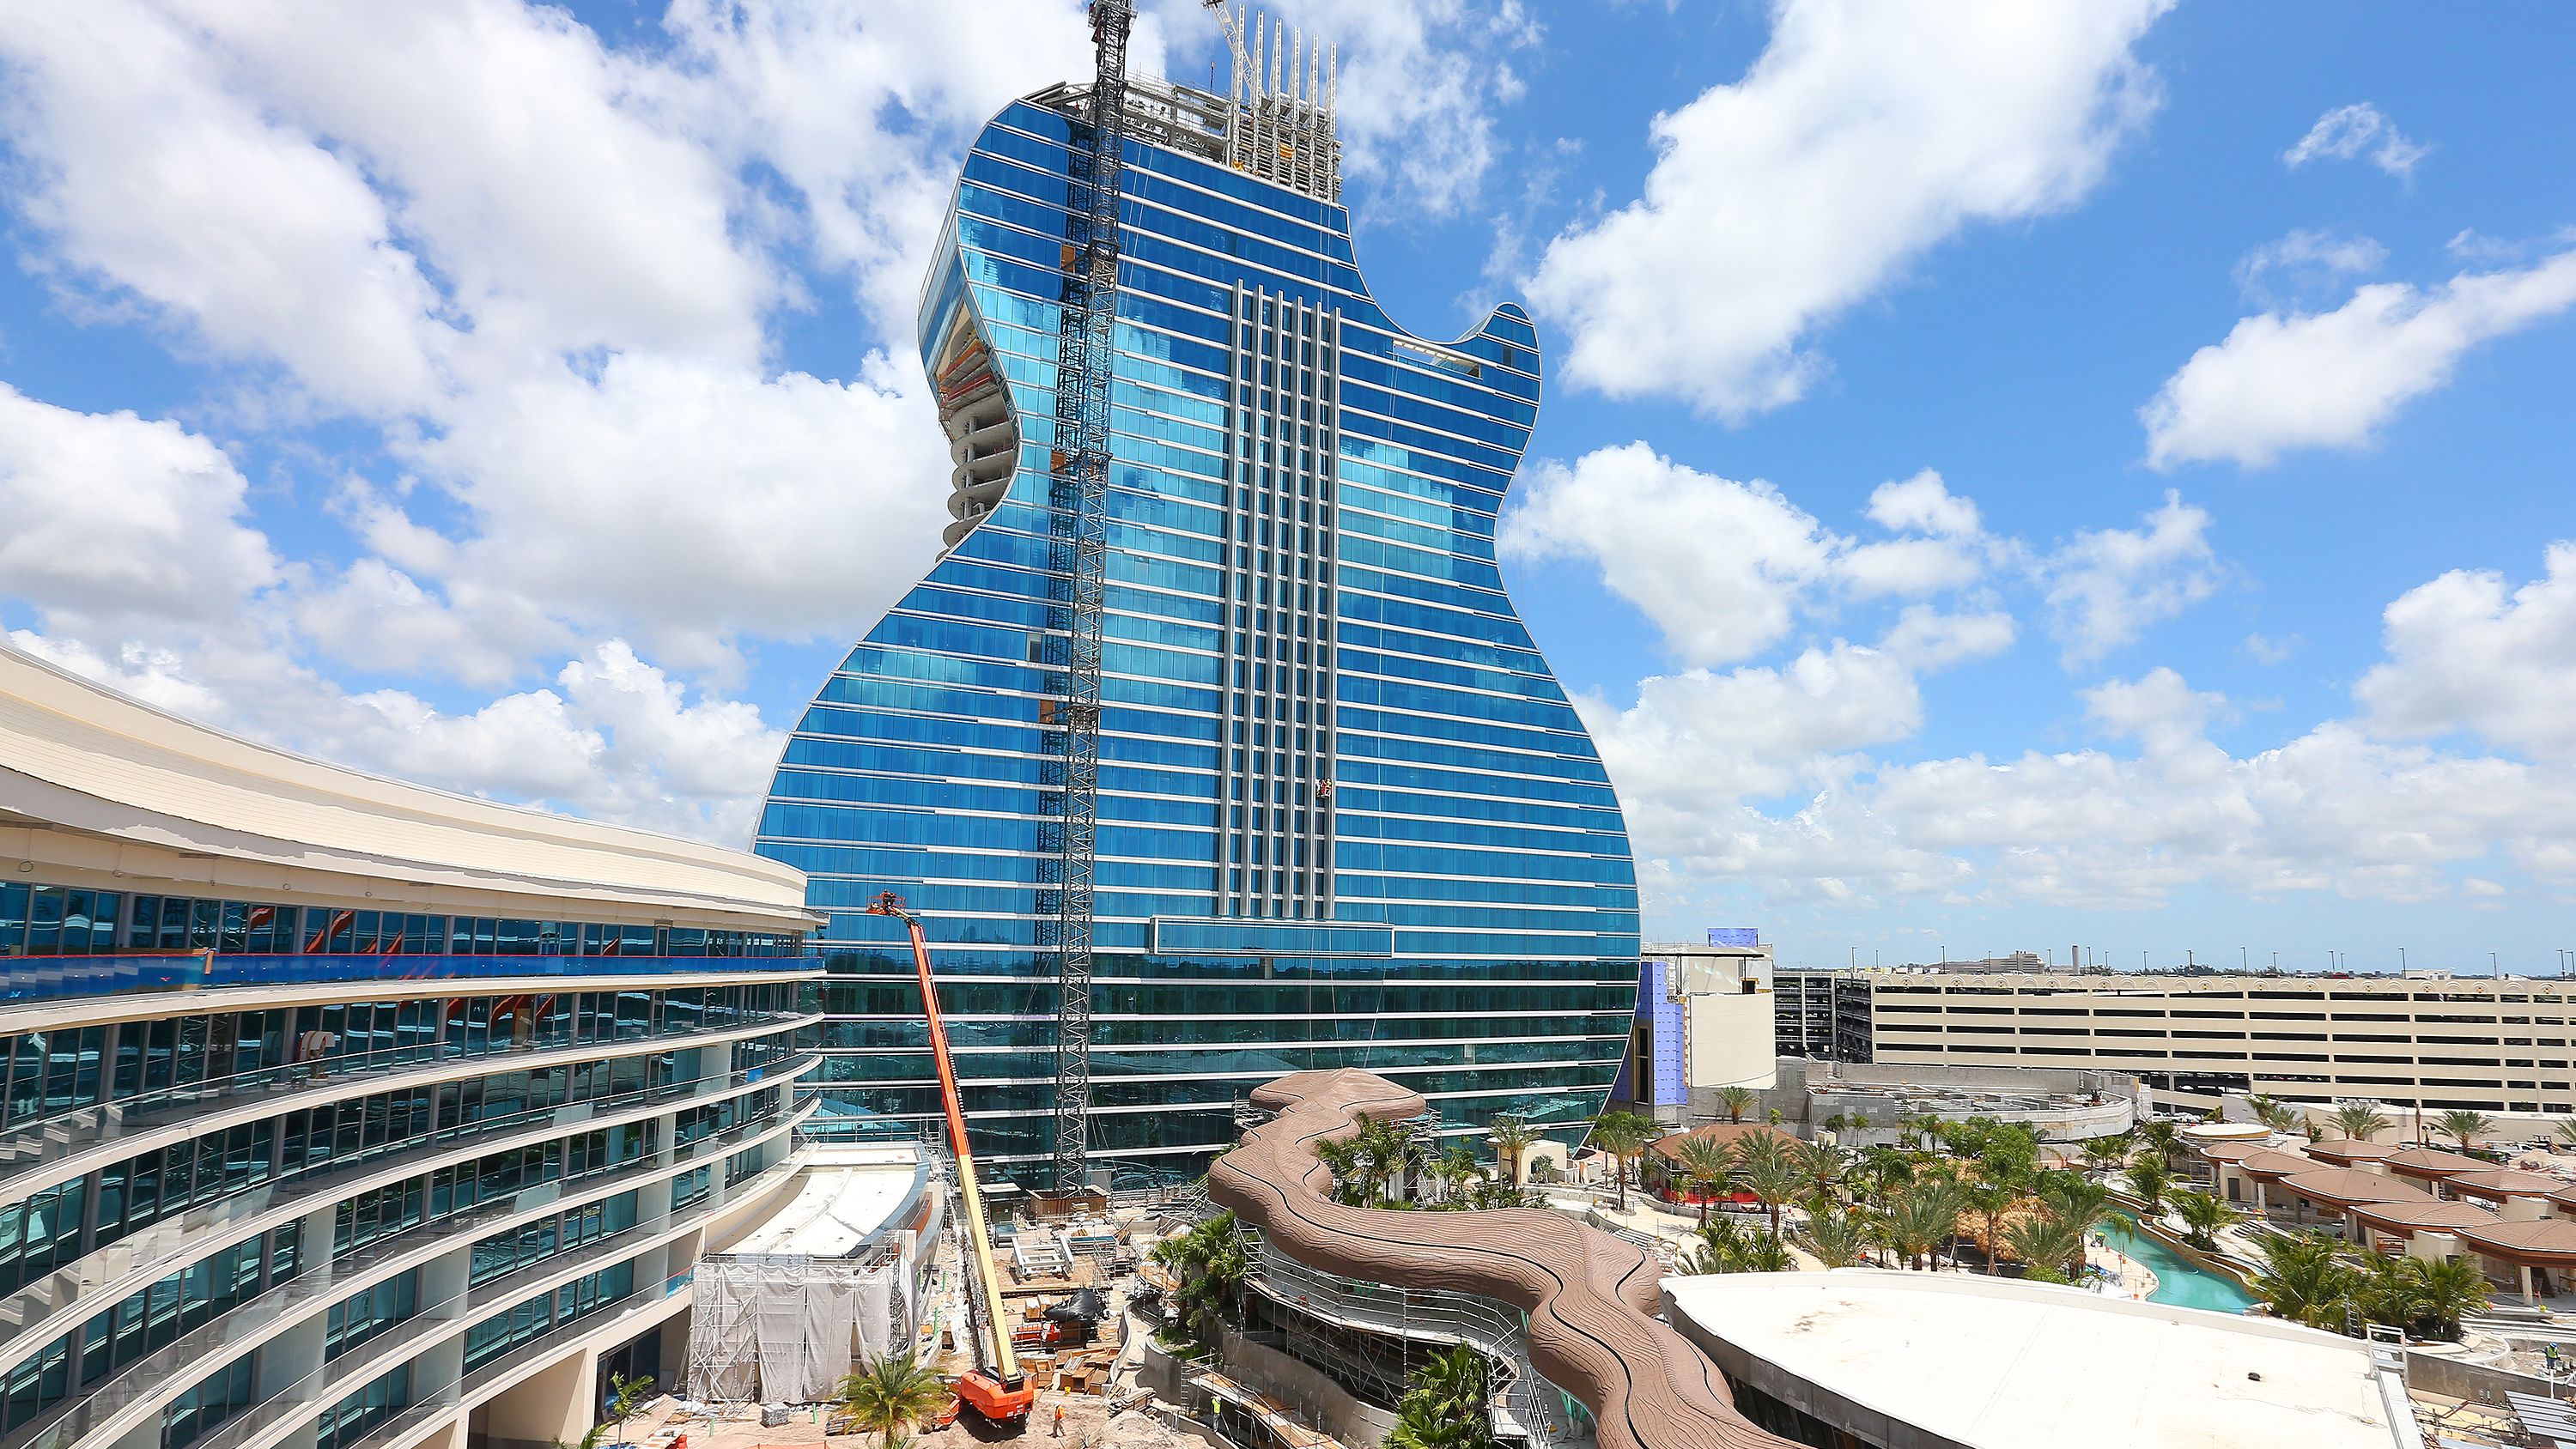 Hard Rock will open a guitar-shaped hotel in Hollywood, Florida | CNN